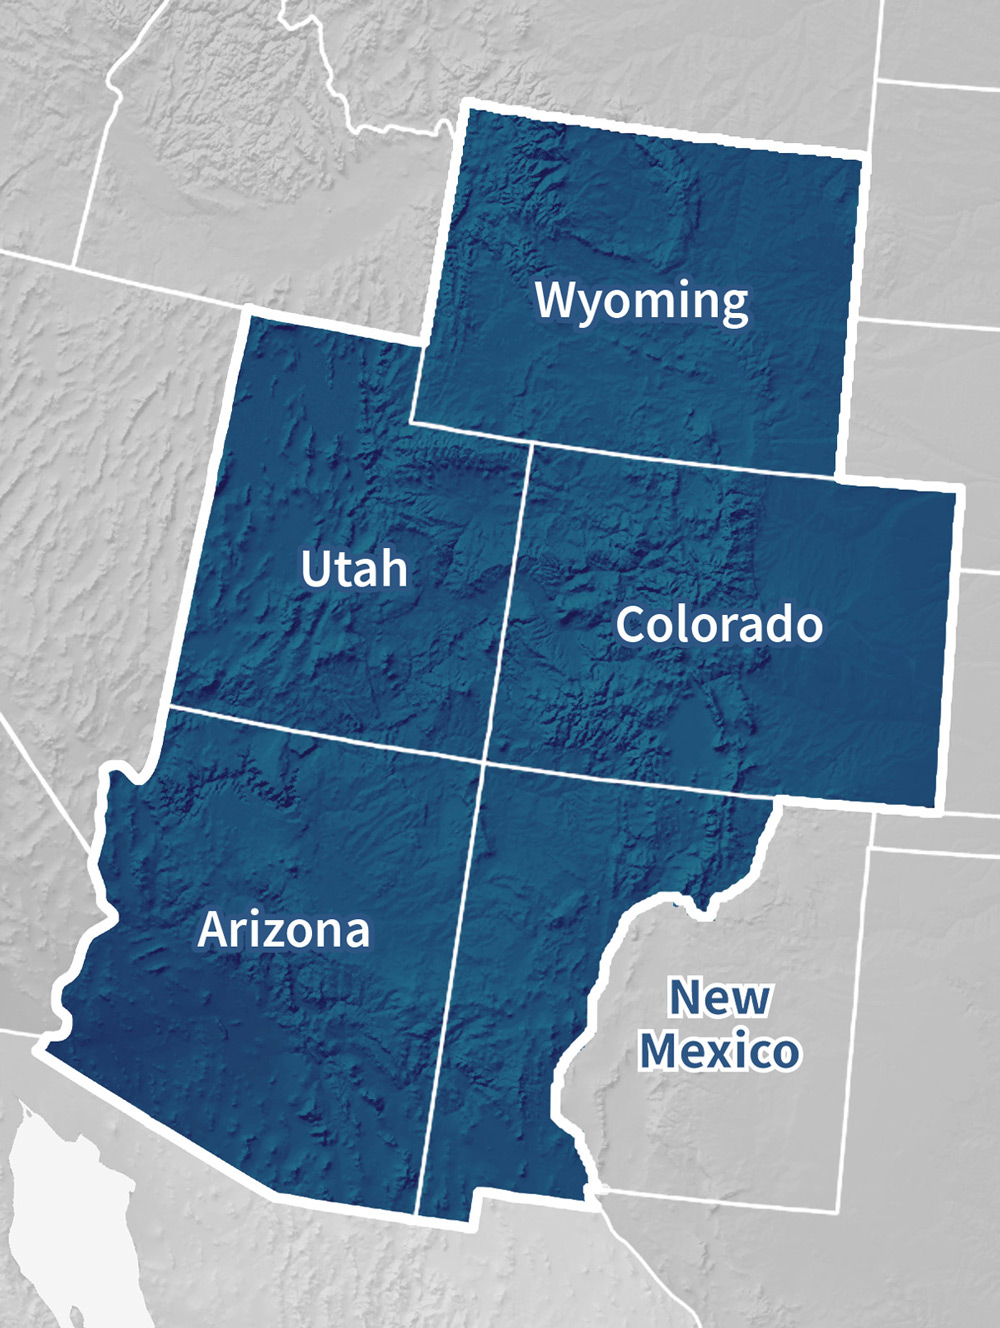 Map of Intermountain West DEWS region, which includes Wyoming, Colorado, Utah, Arizona, and part of western New Mexico.